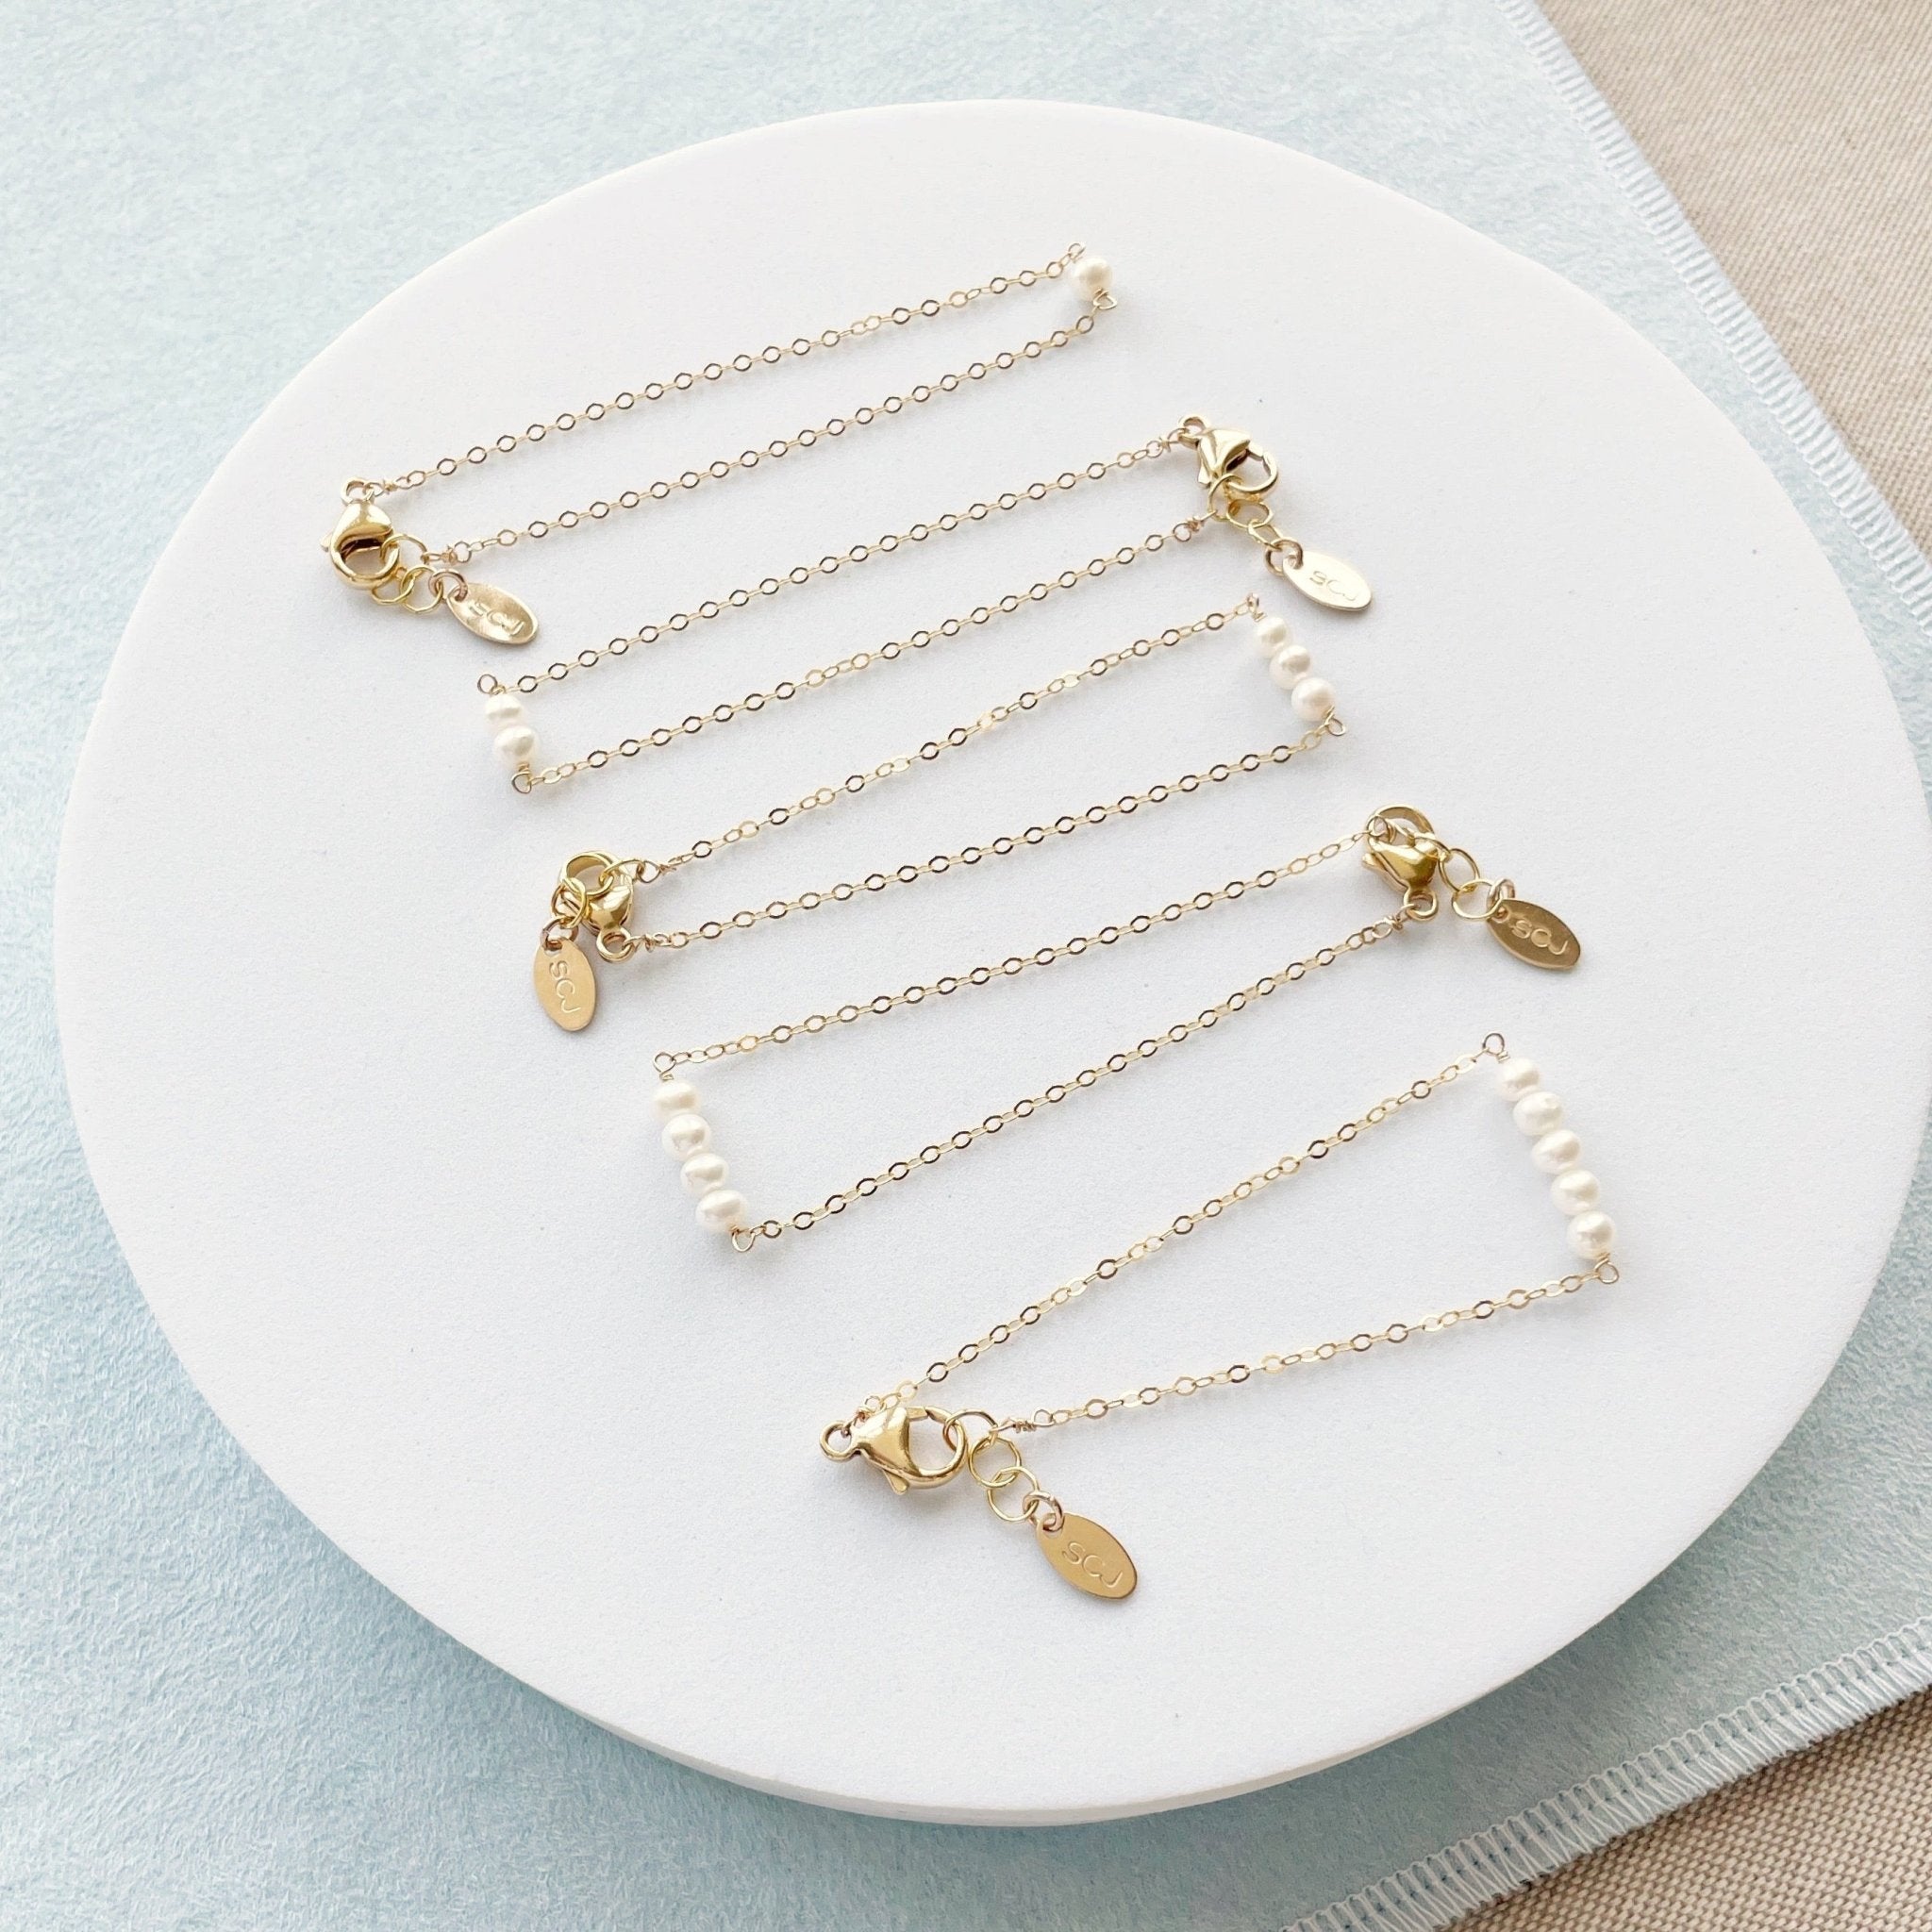 5 gold and pearl bracelets with various numbers of pearls close together. La Mere Bracelet by Sarah Cornwell Jewelry